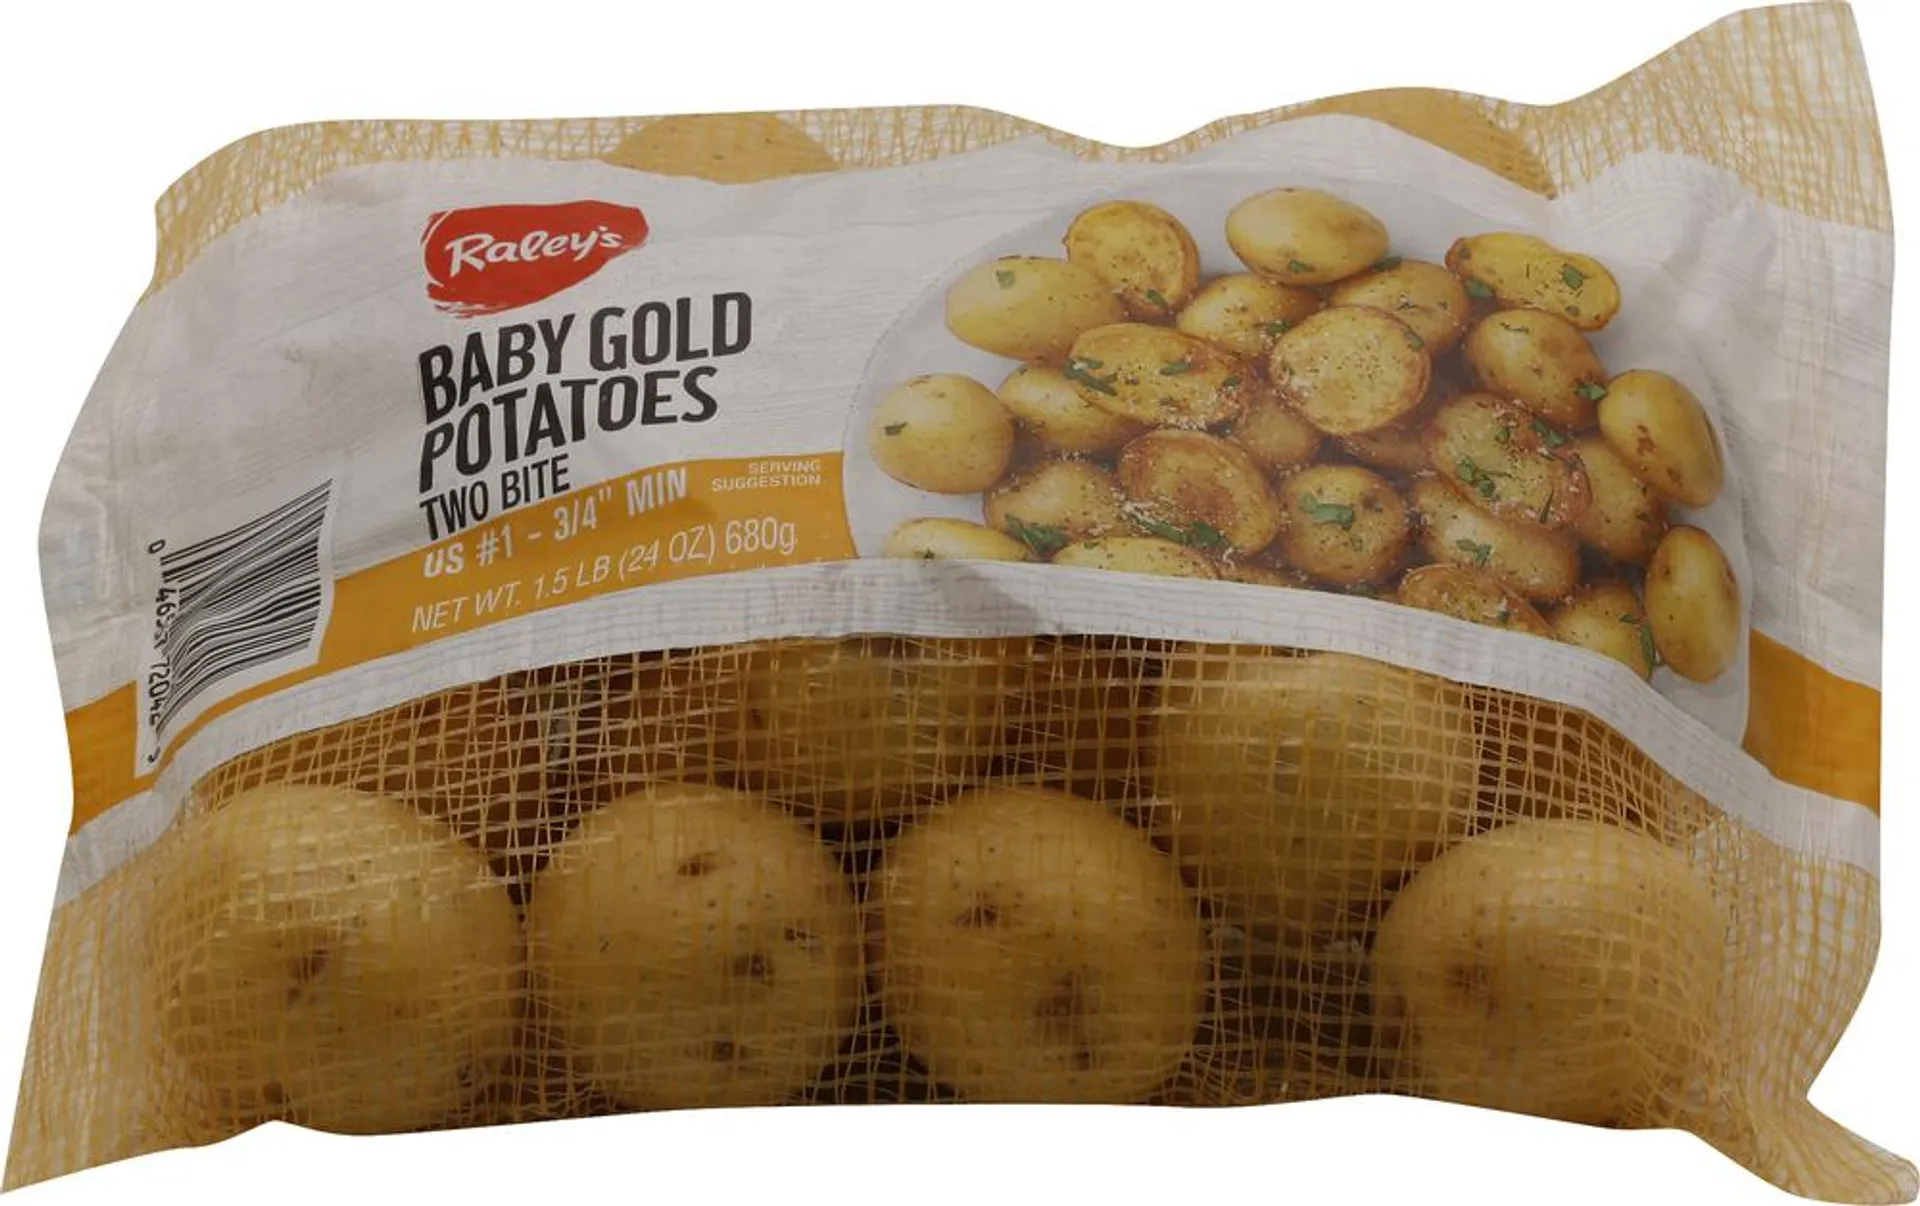 Raley's Baby Gold Potatoes